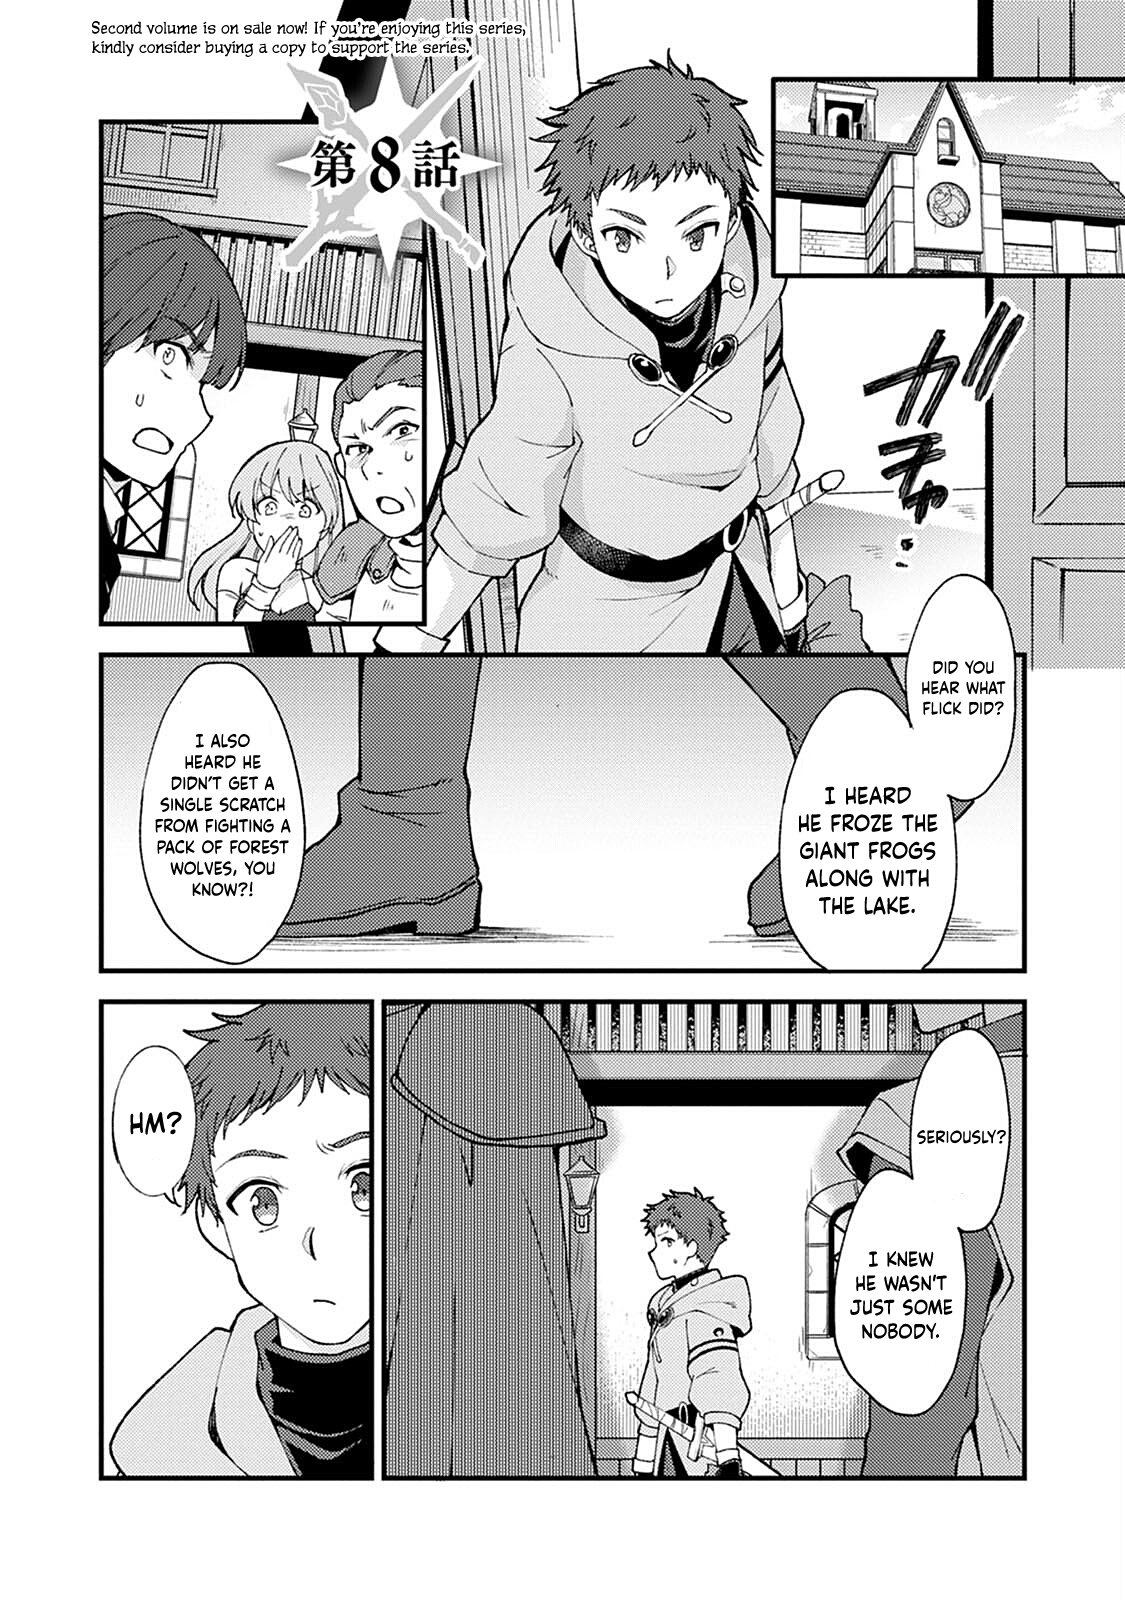 A Sword Master Childhood Friend Power Harassed Me Harshly, So I Broke Off Our Relationship And Made A Fresh Start At The Frontier As A Magic Swordsman - Page 2